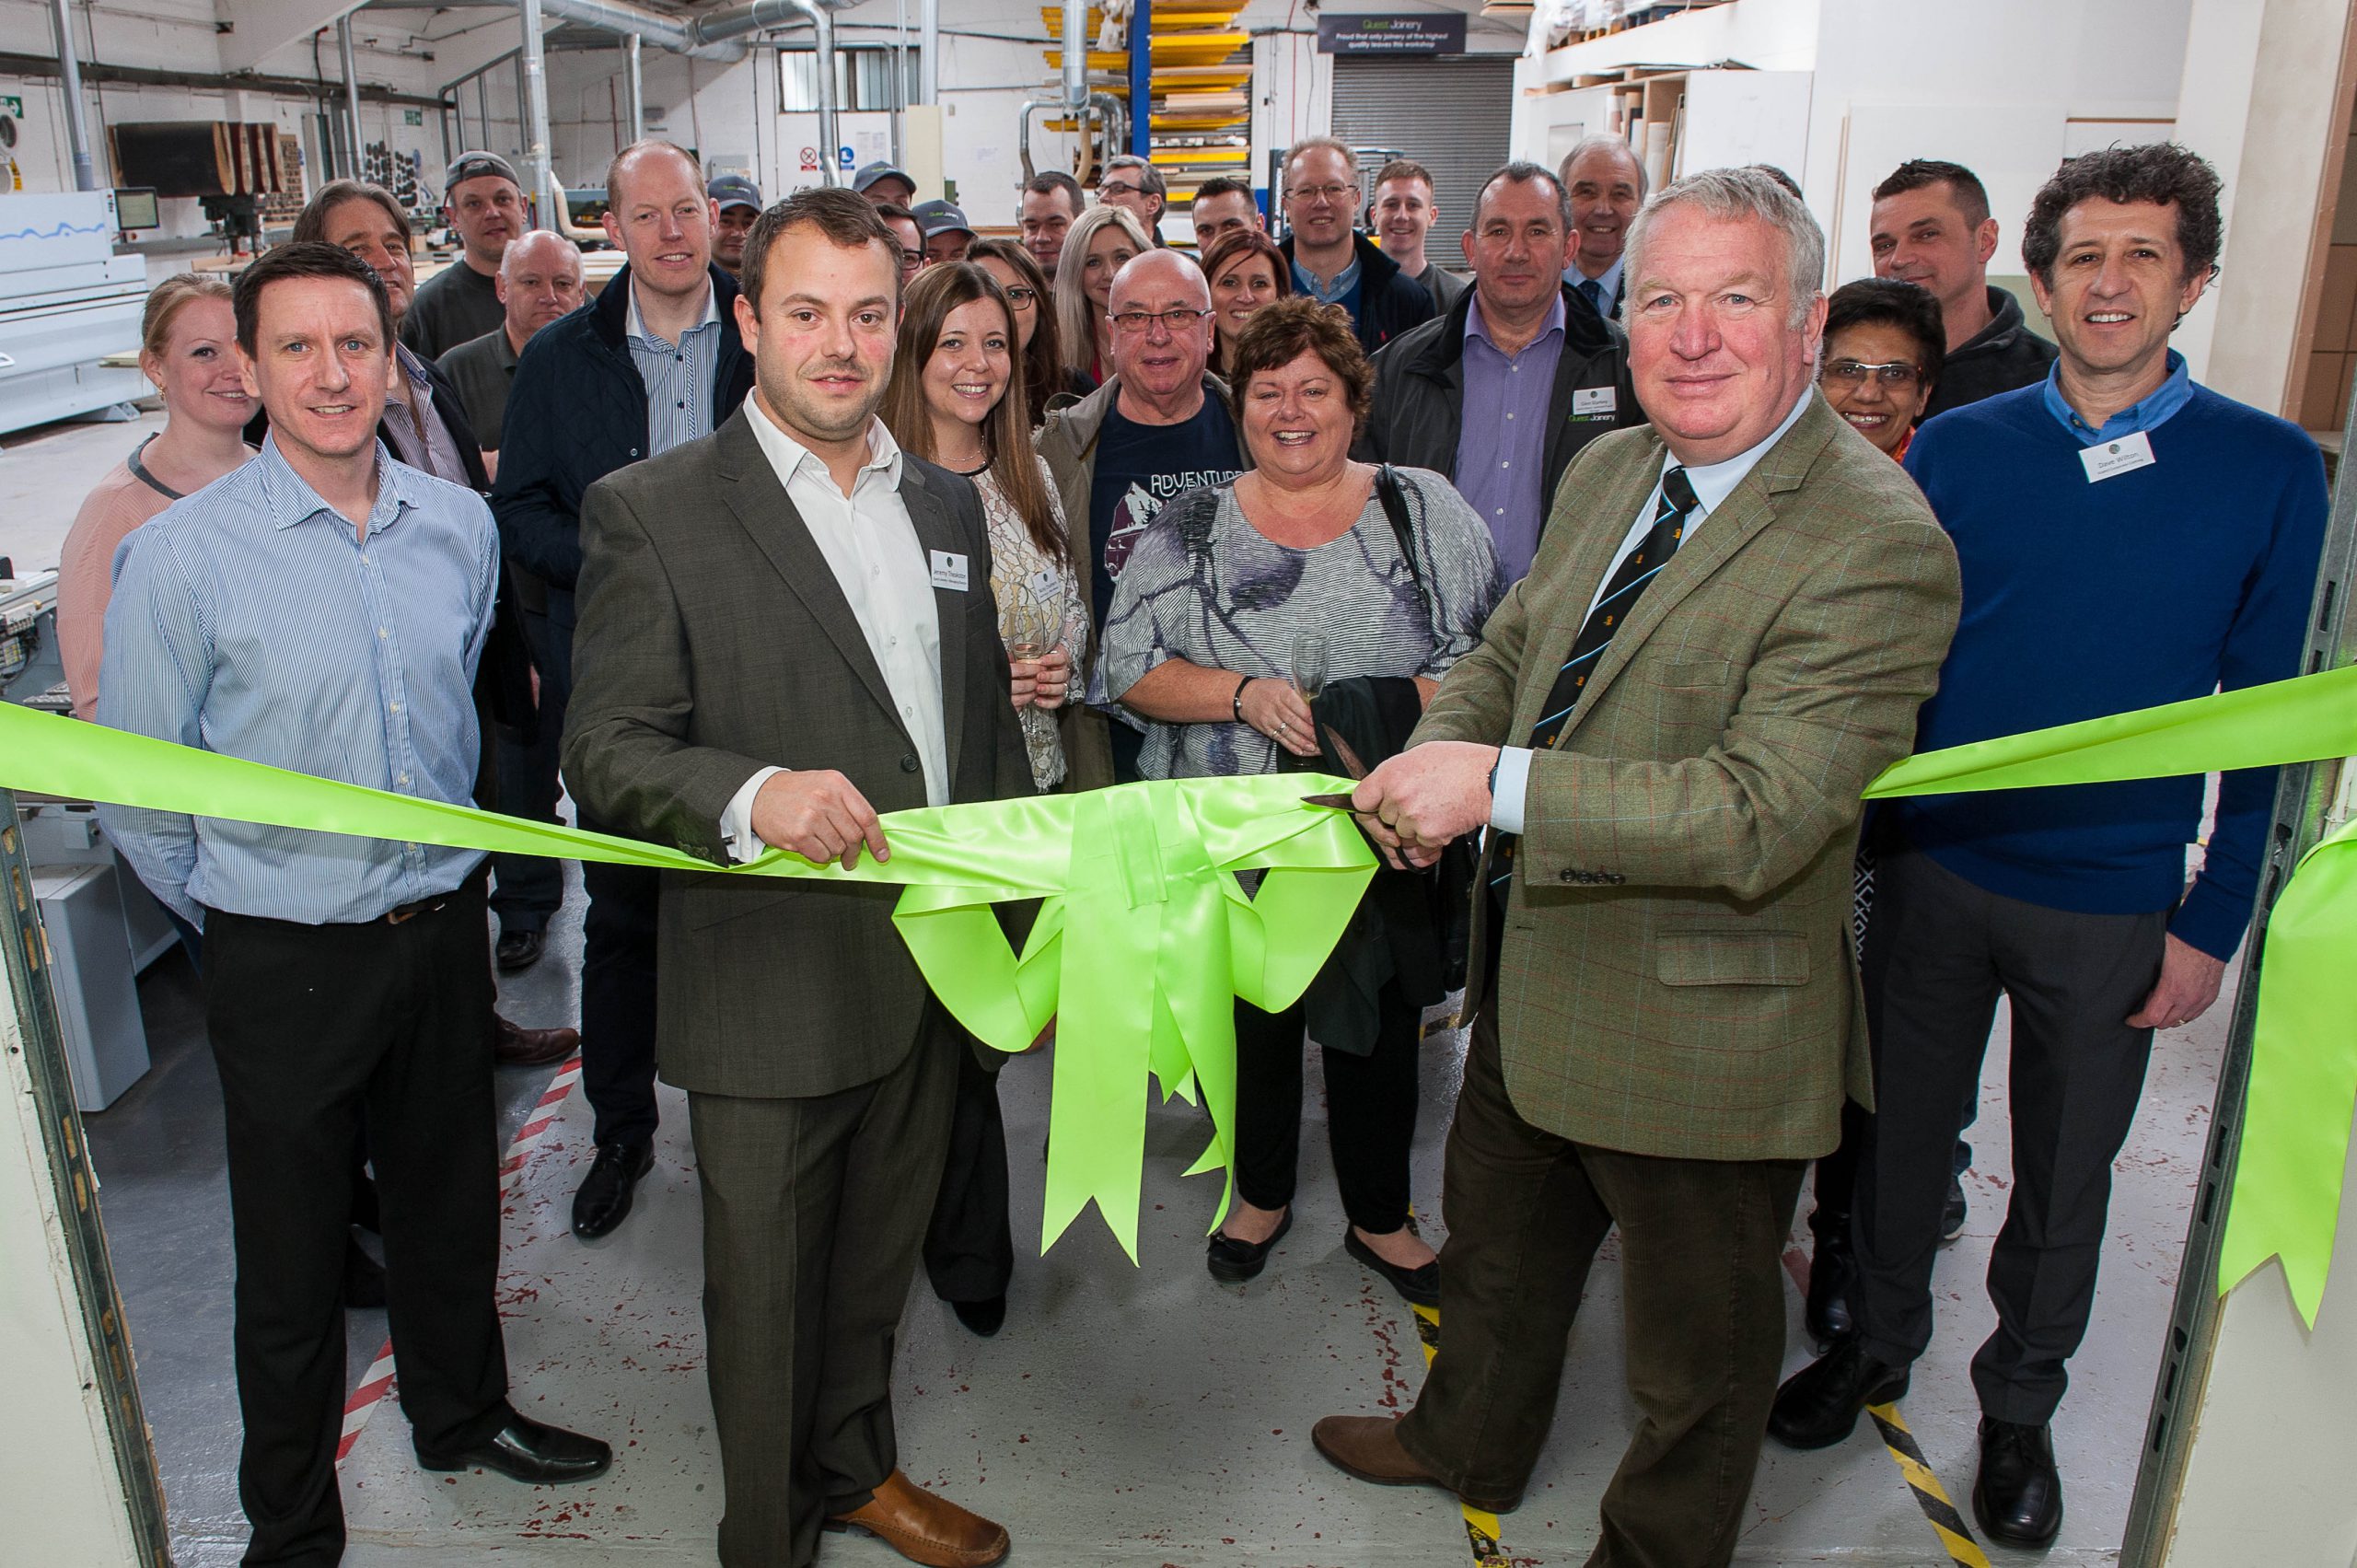 Hemel Joinery Manufacturer Opens New Premises And Celebrates Rapid Growth